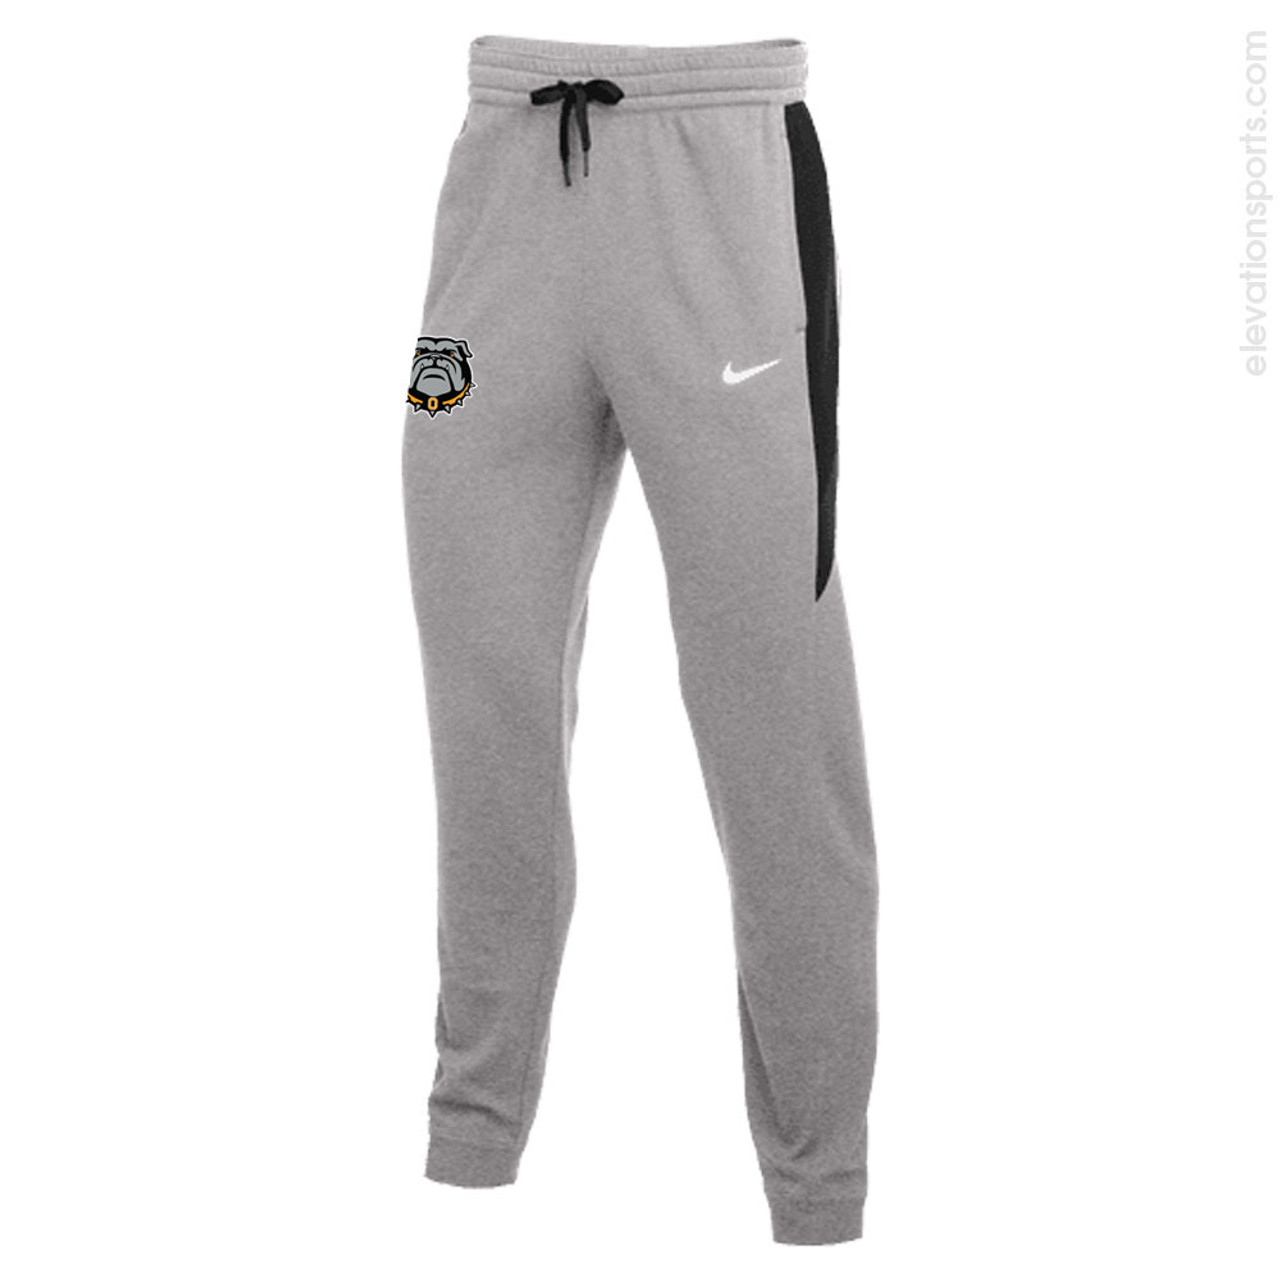 Nike NBA Compression tights  Running sleeves, Nike tech sweatsuit